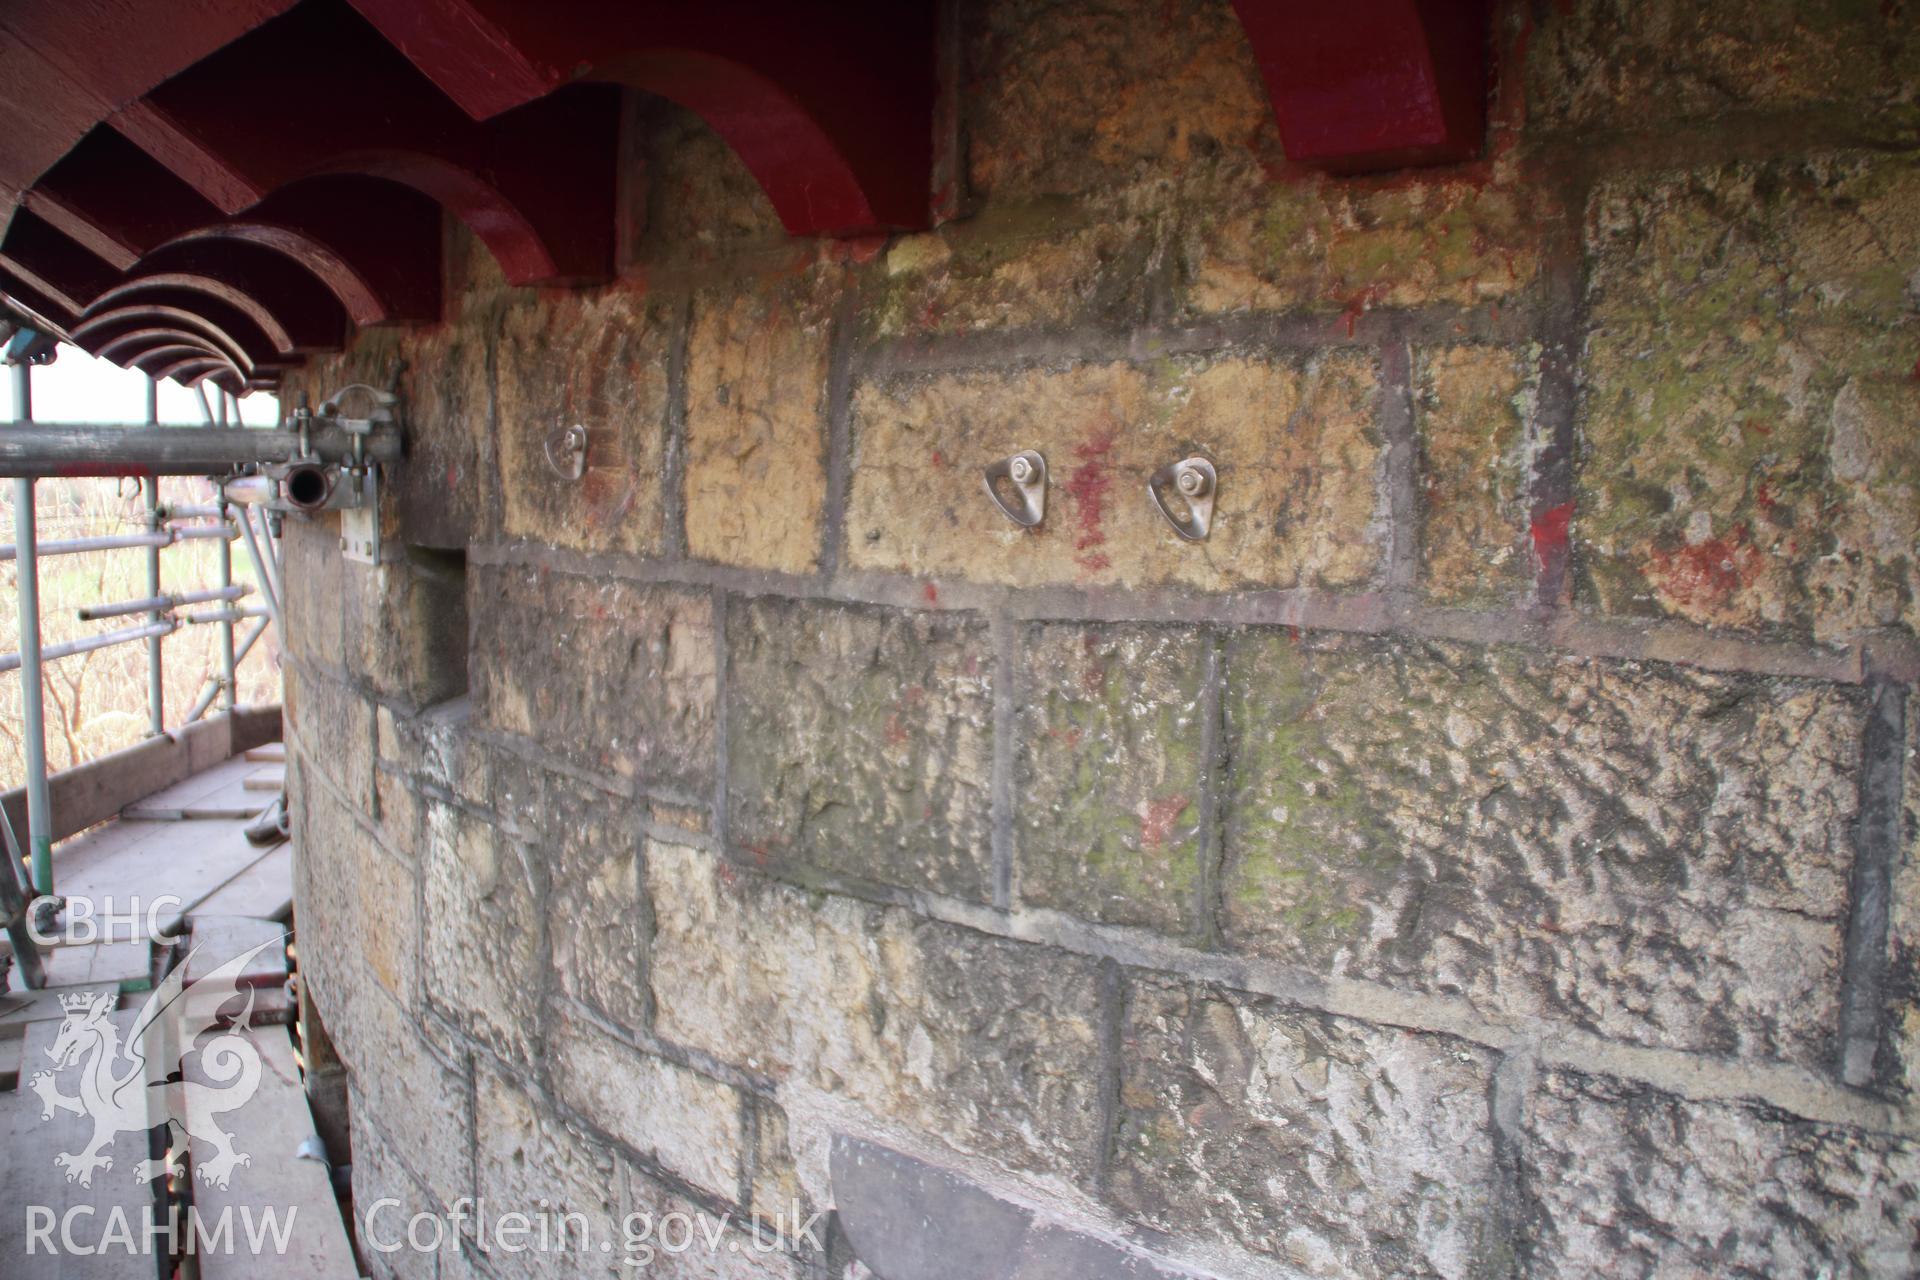 Detailed view of tower wall taken on 3rd April 2019. Part of "Castell Coch, Tongwynlais, Cardiff, Glamorgan. Archaeological Building Investigation and Recording and Watching Brief" by Richard Scott Jones of Heritage Recording Services Wales. Report No 202.